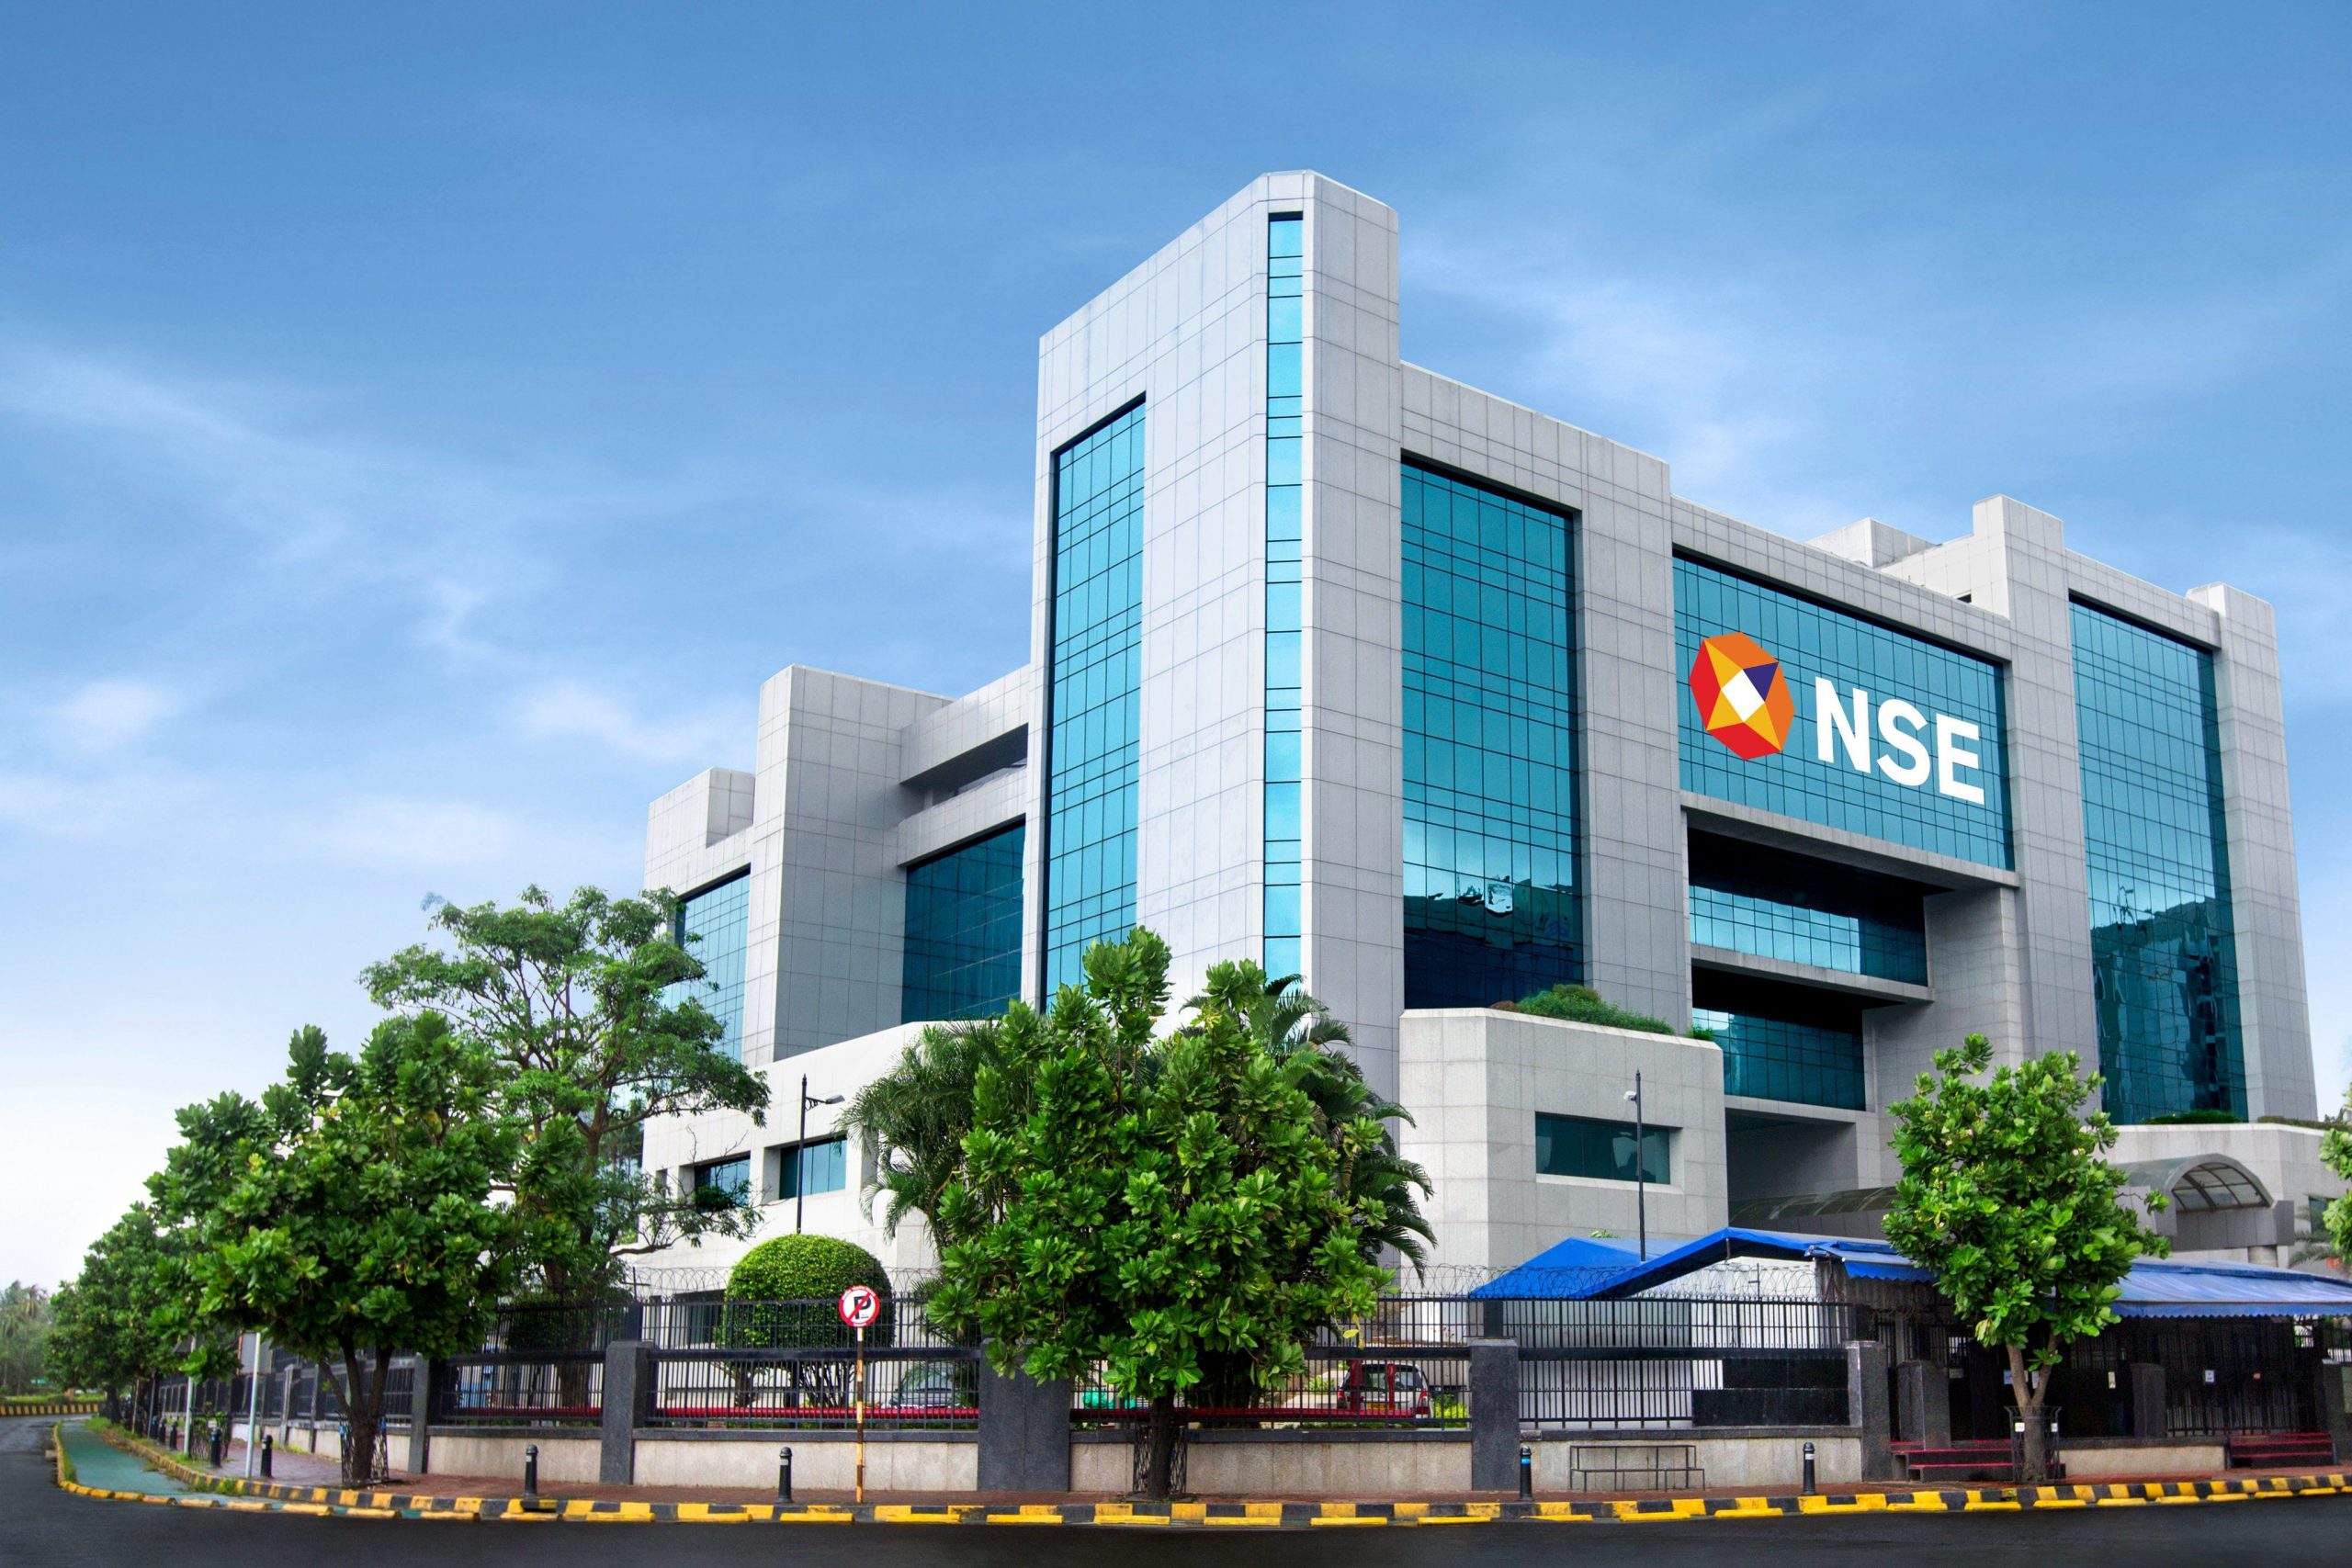 NSE F&O Ban: Balrampur Chini and others under ban on Friday, August 19, 2022